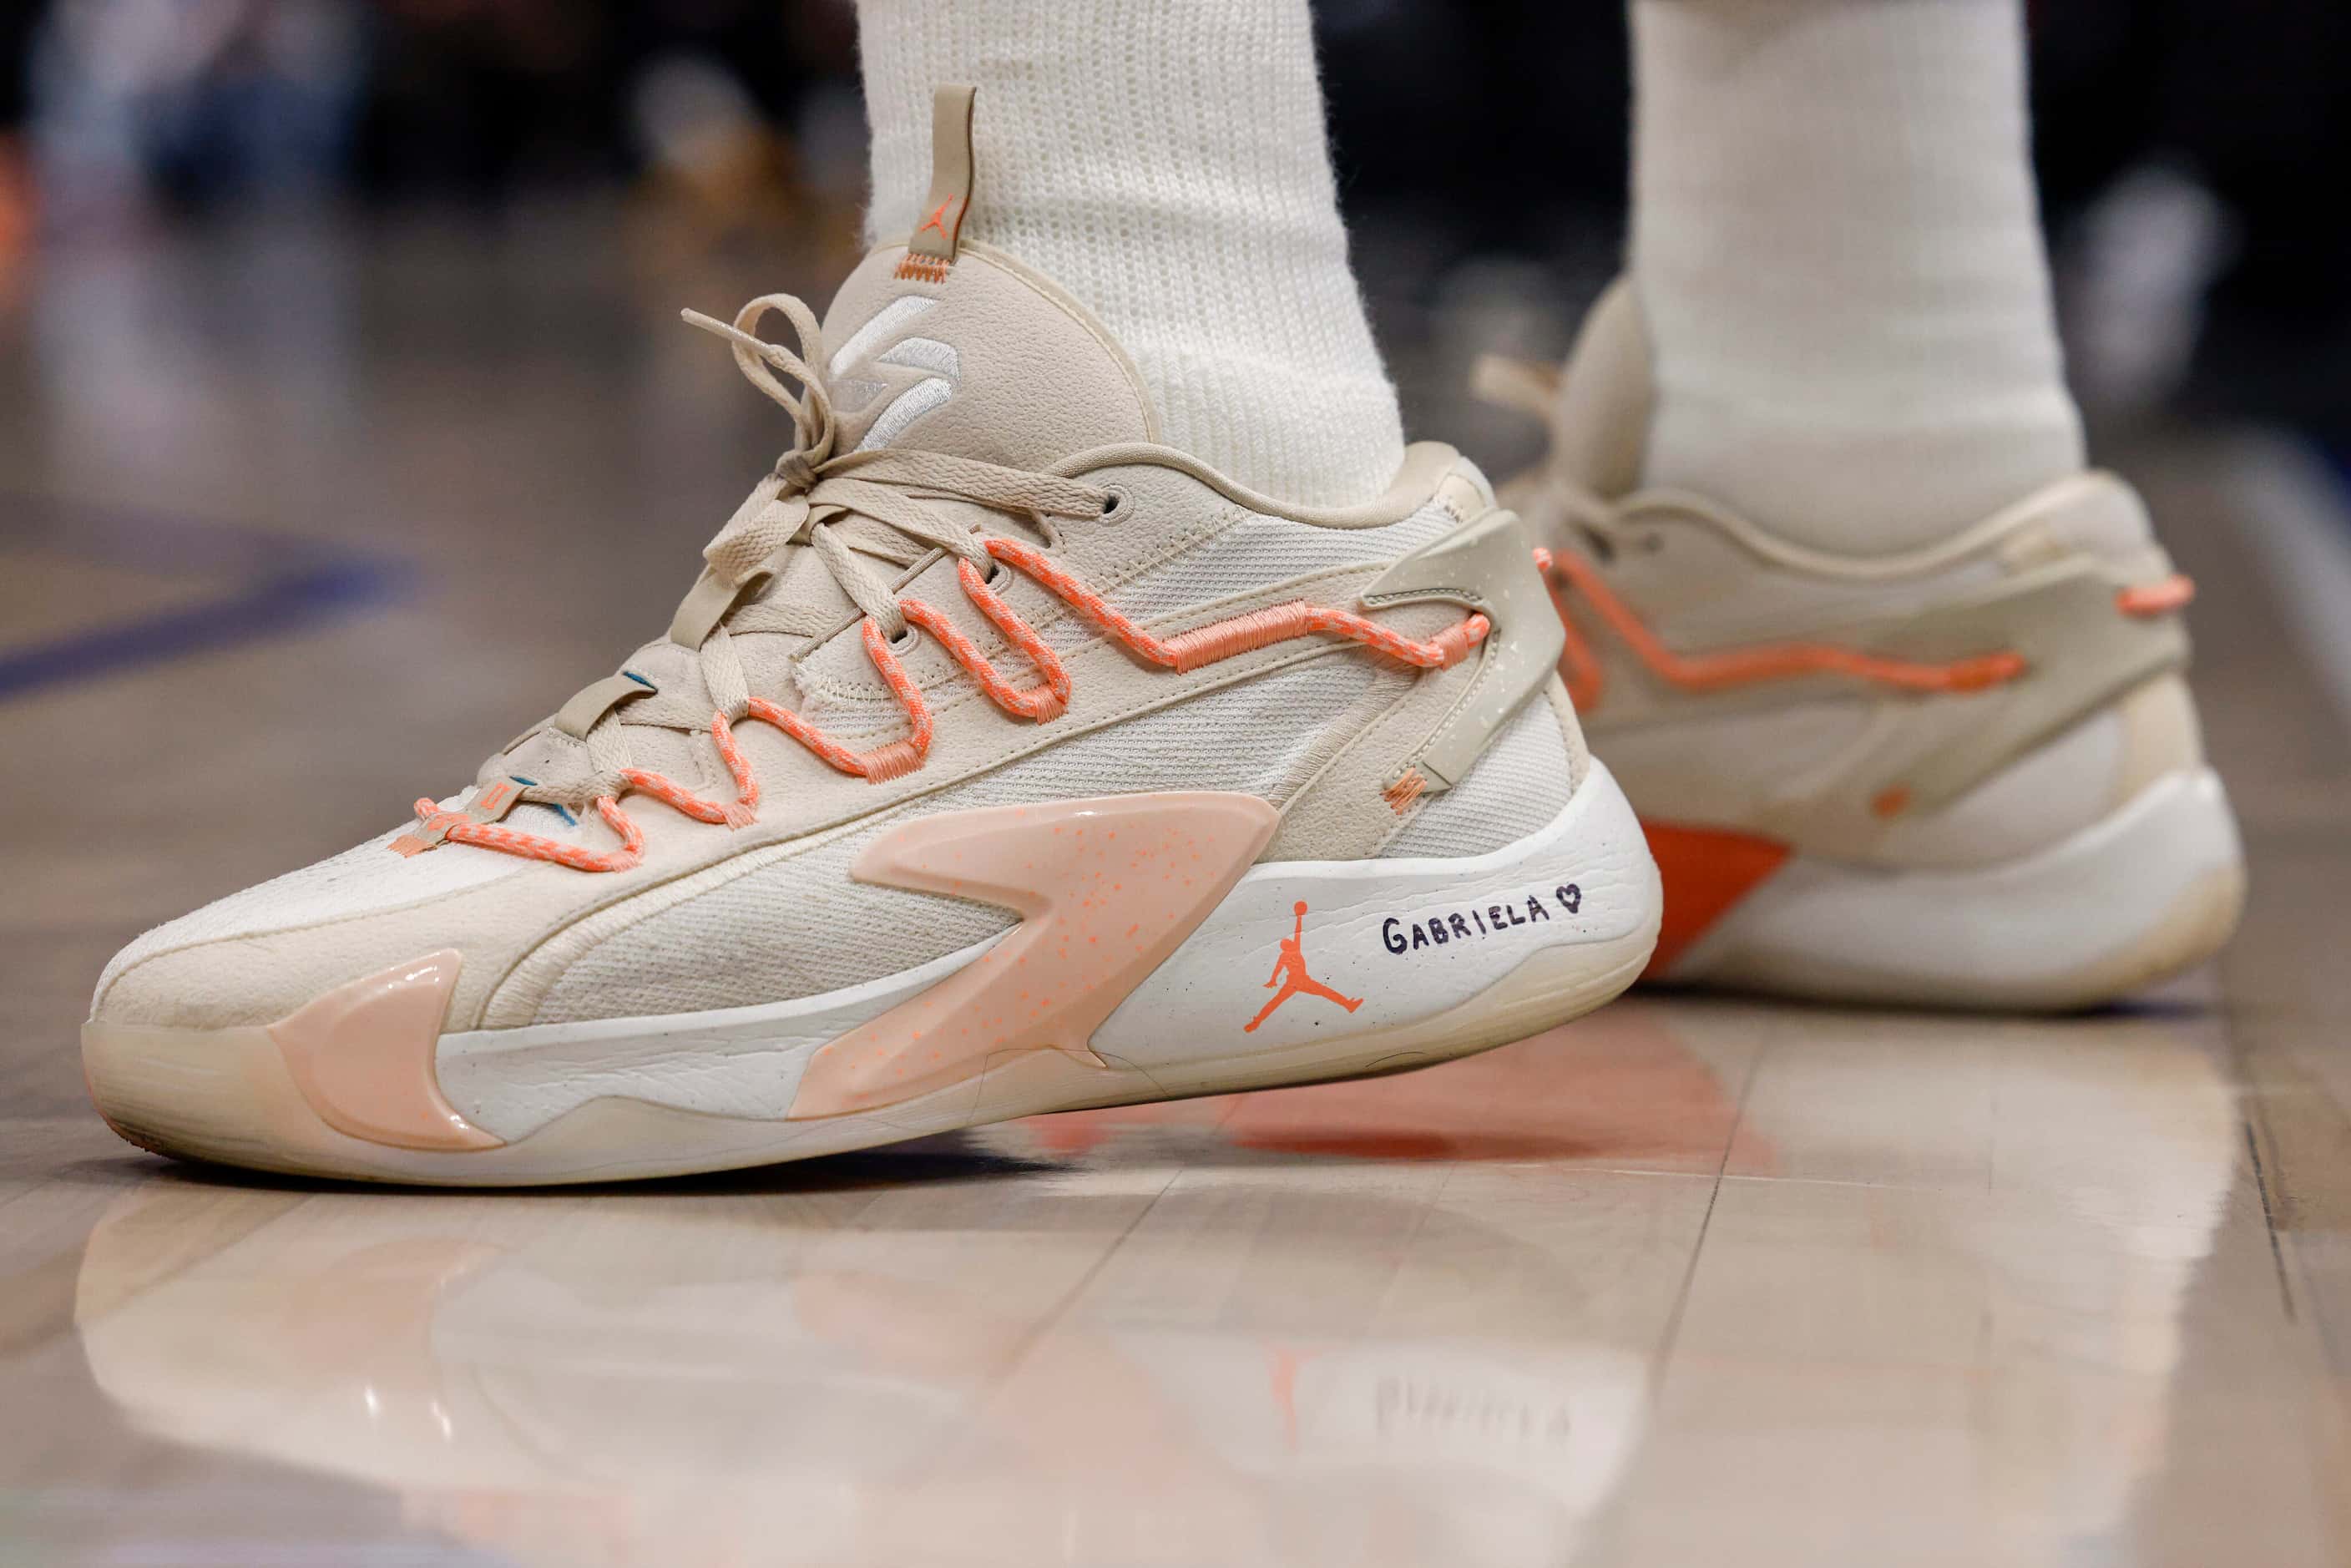 A detail view of the shoes of Dallas Mavericks guard Luka Doncic with his daughter’s name...